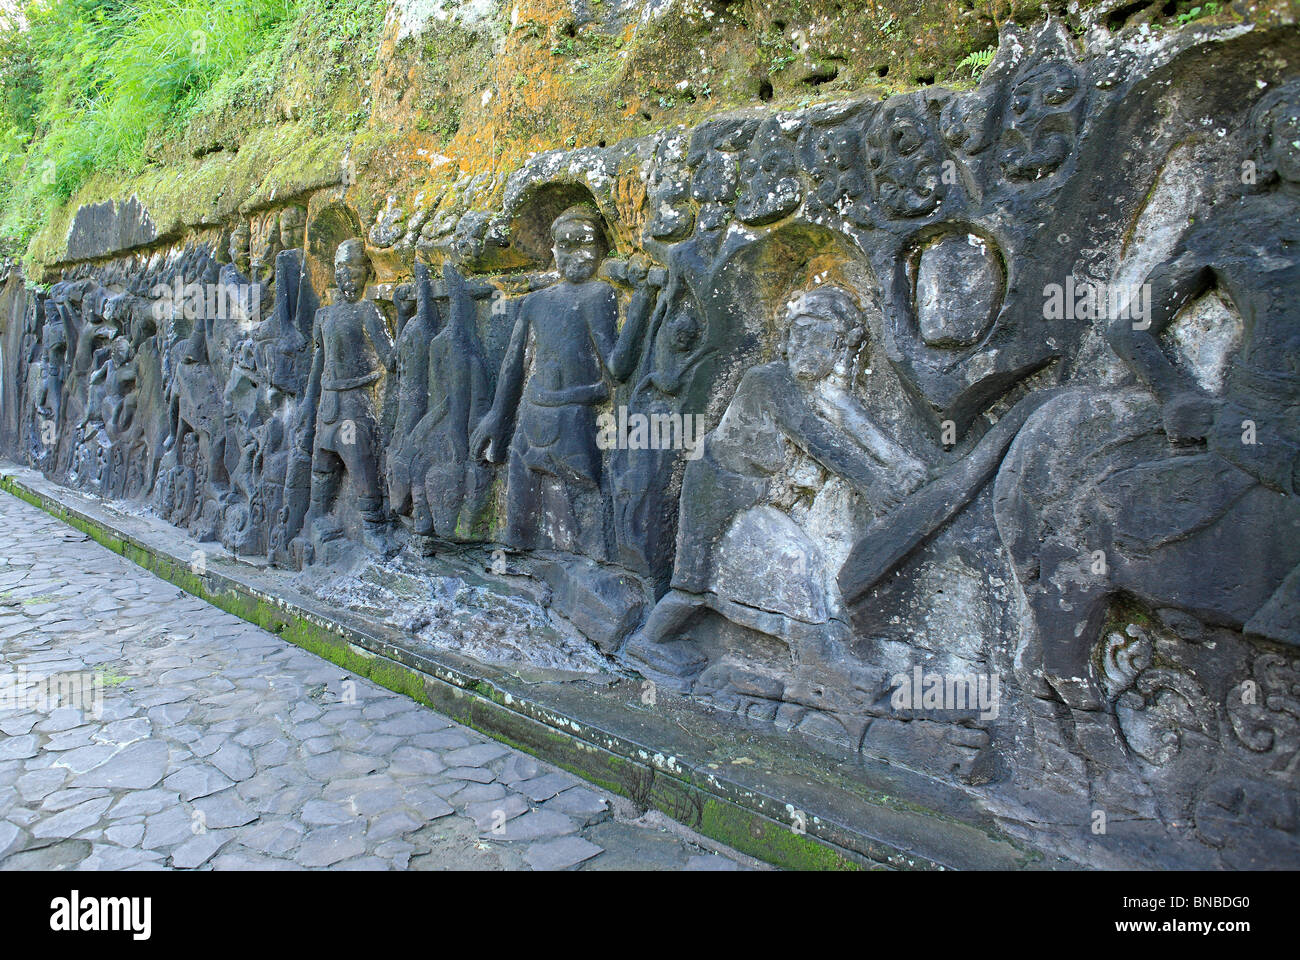 Yeh Pulu relief is an ancient complex of rock carvings at Bedulu, near Ubud, Bali. Stock Photo